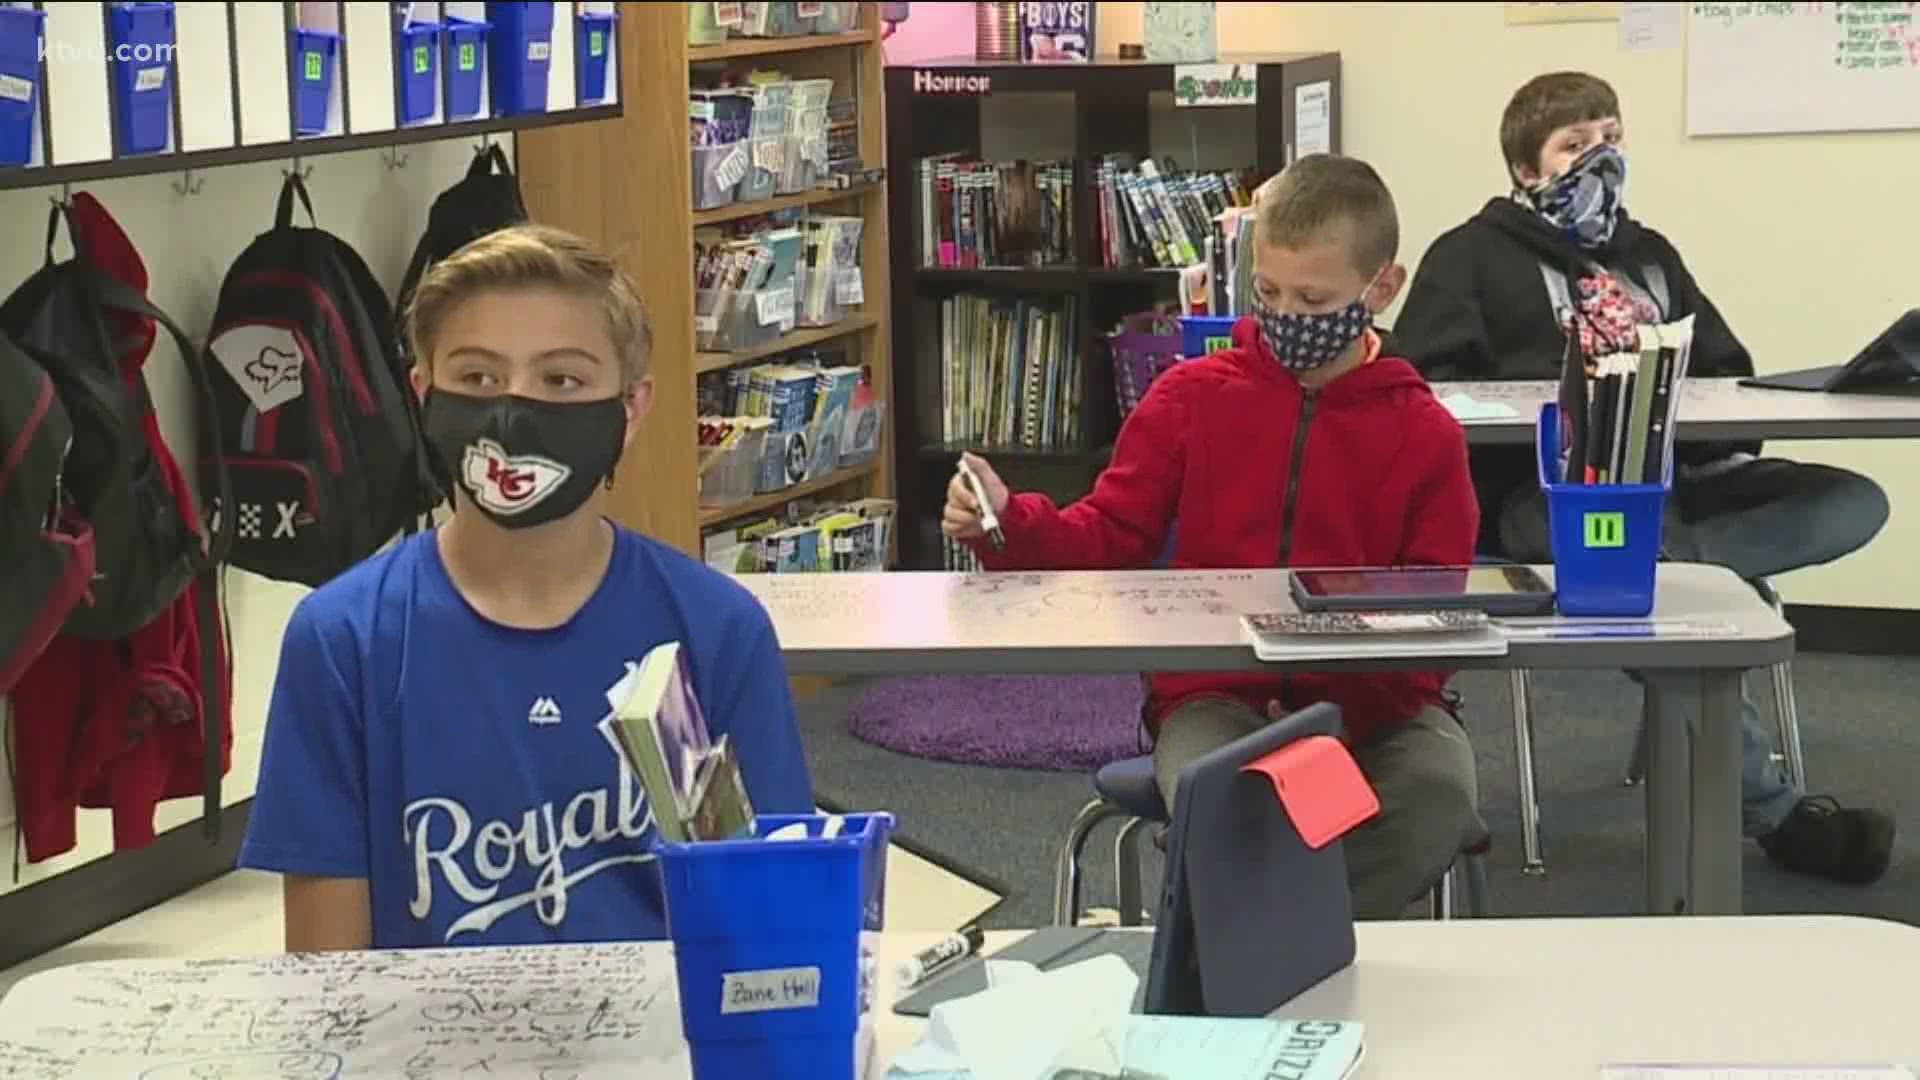 As the start of school approaches, many local school districts have already declared that wearing a mask in the classroom will be optional.